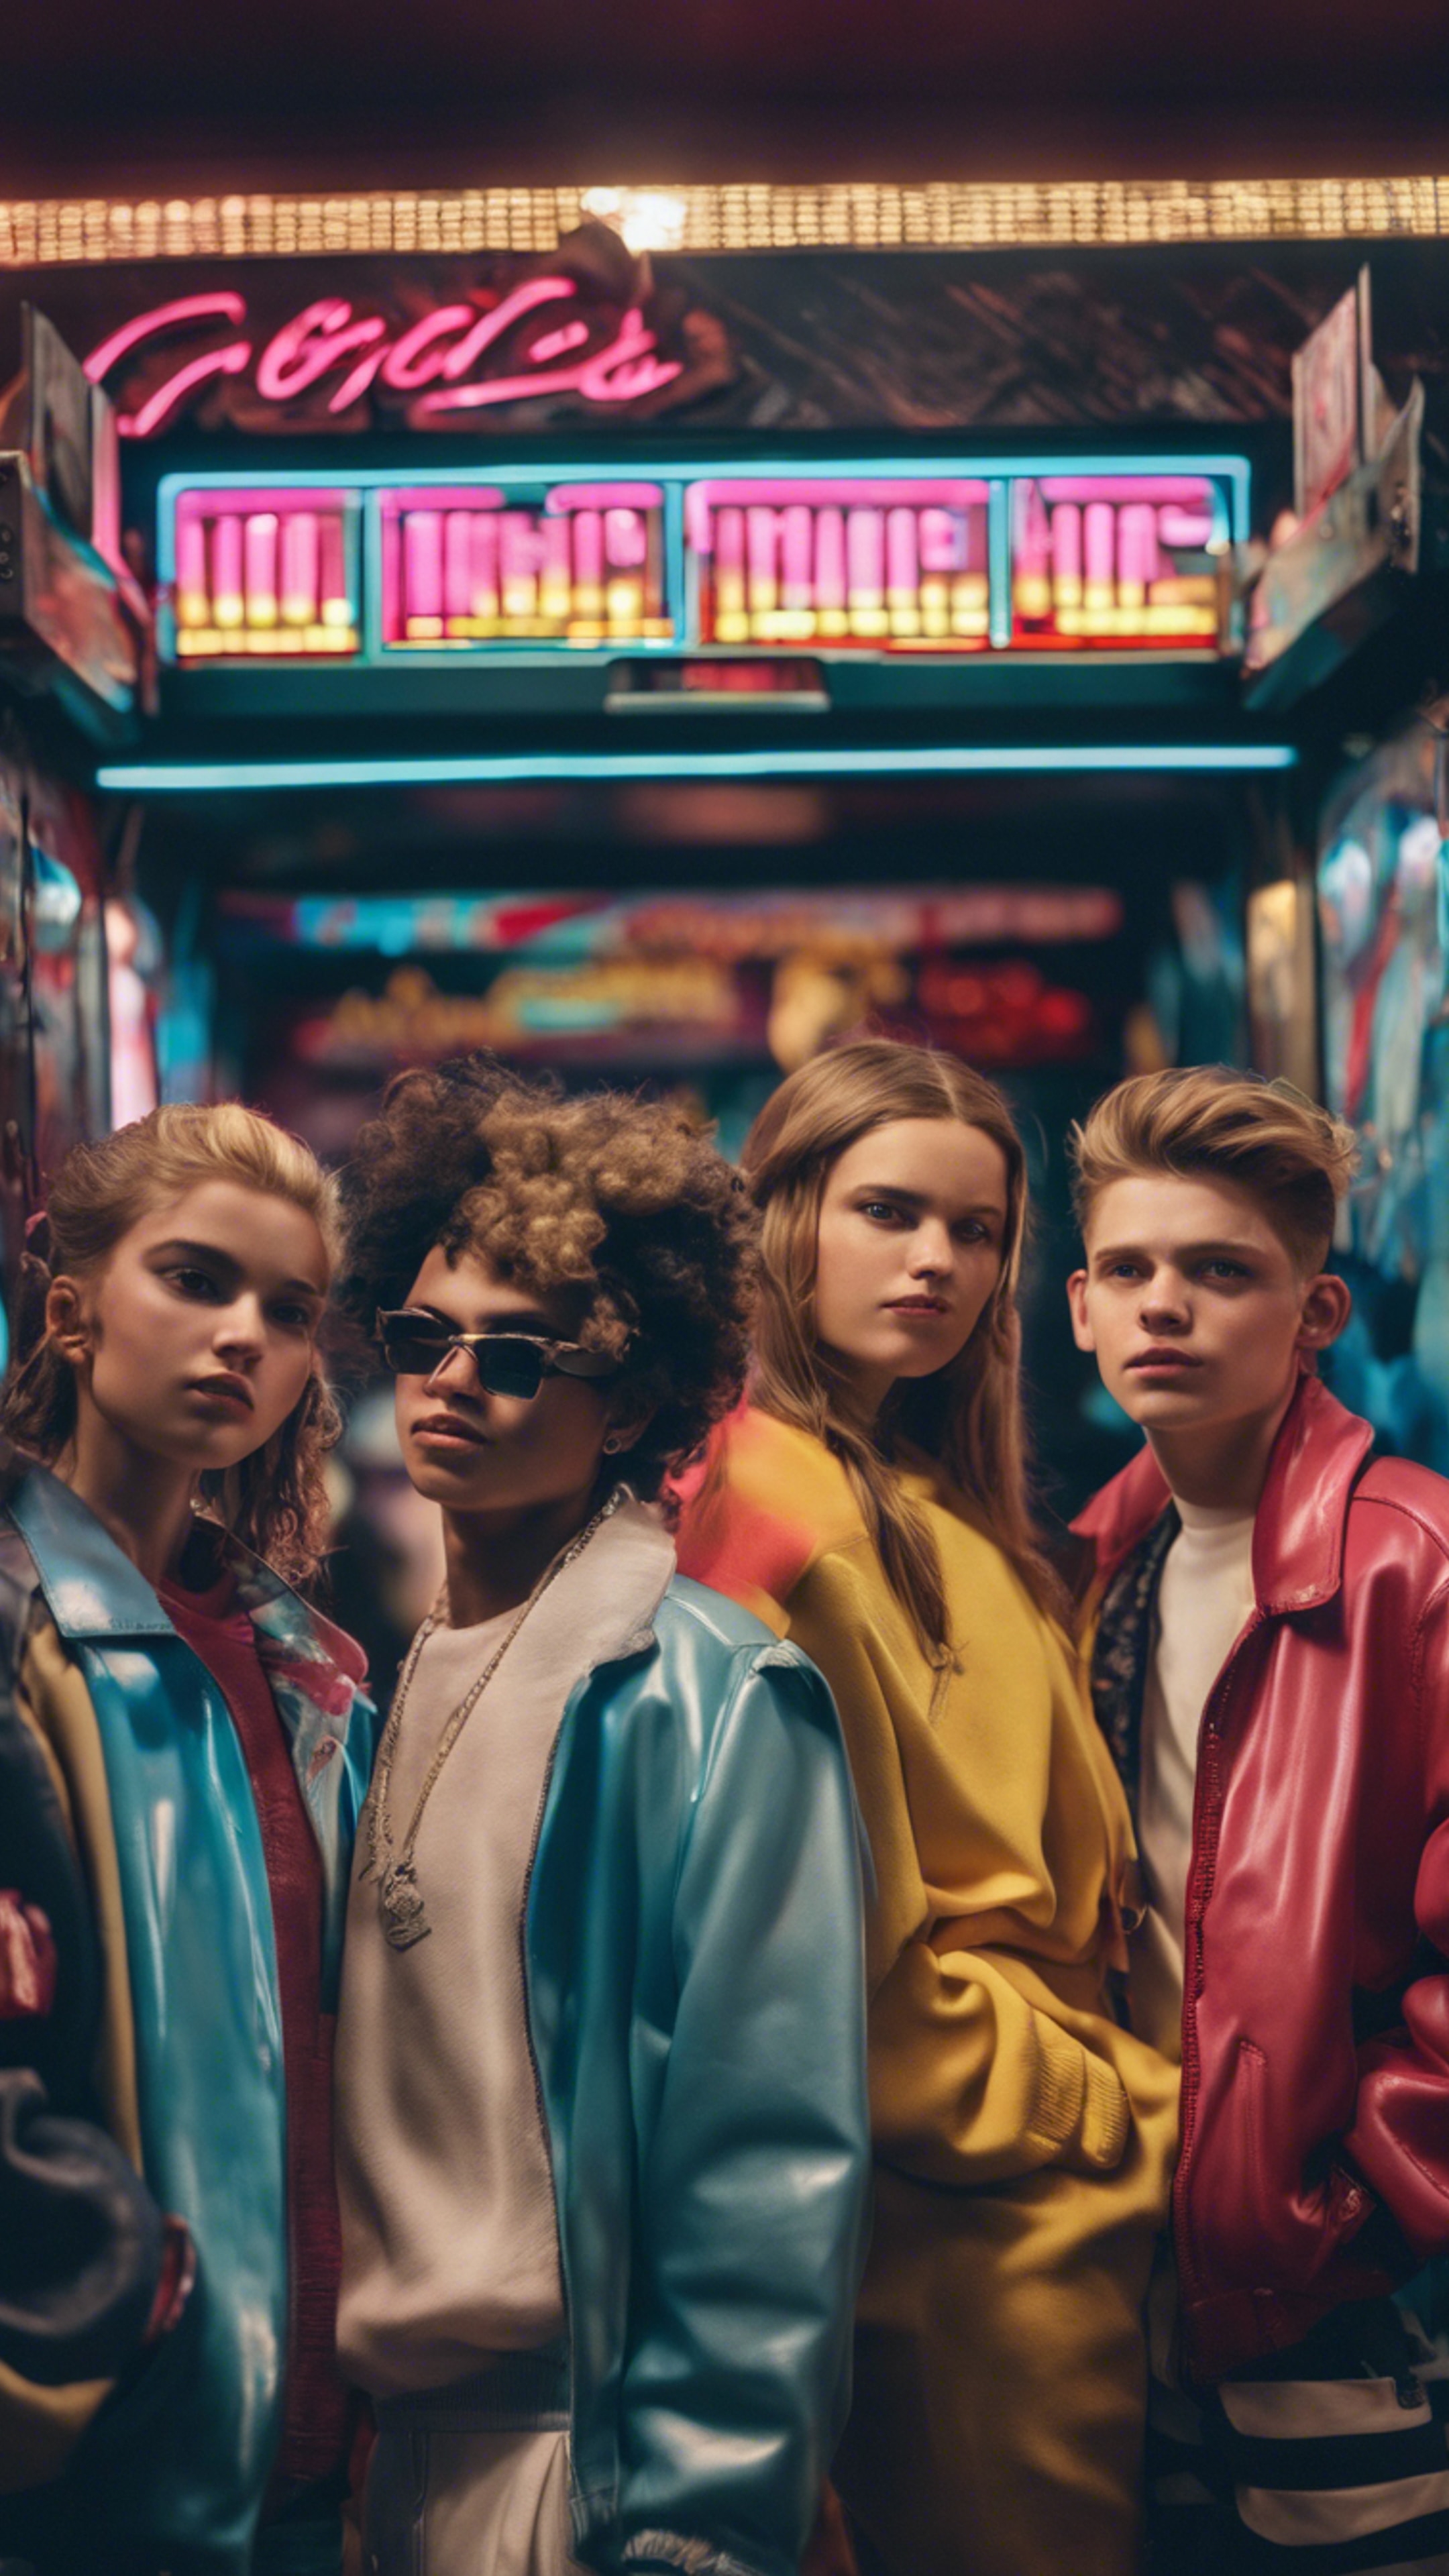 A group of teenagers dressed in iconic 80s fashion, hanging out at an arcade. Tapeta[419df1d215924a4a865f]